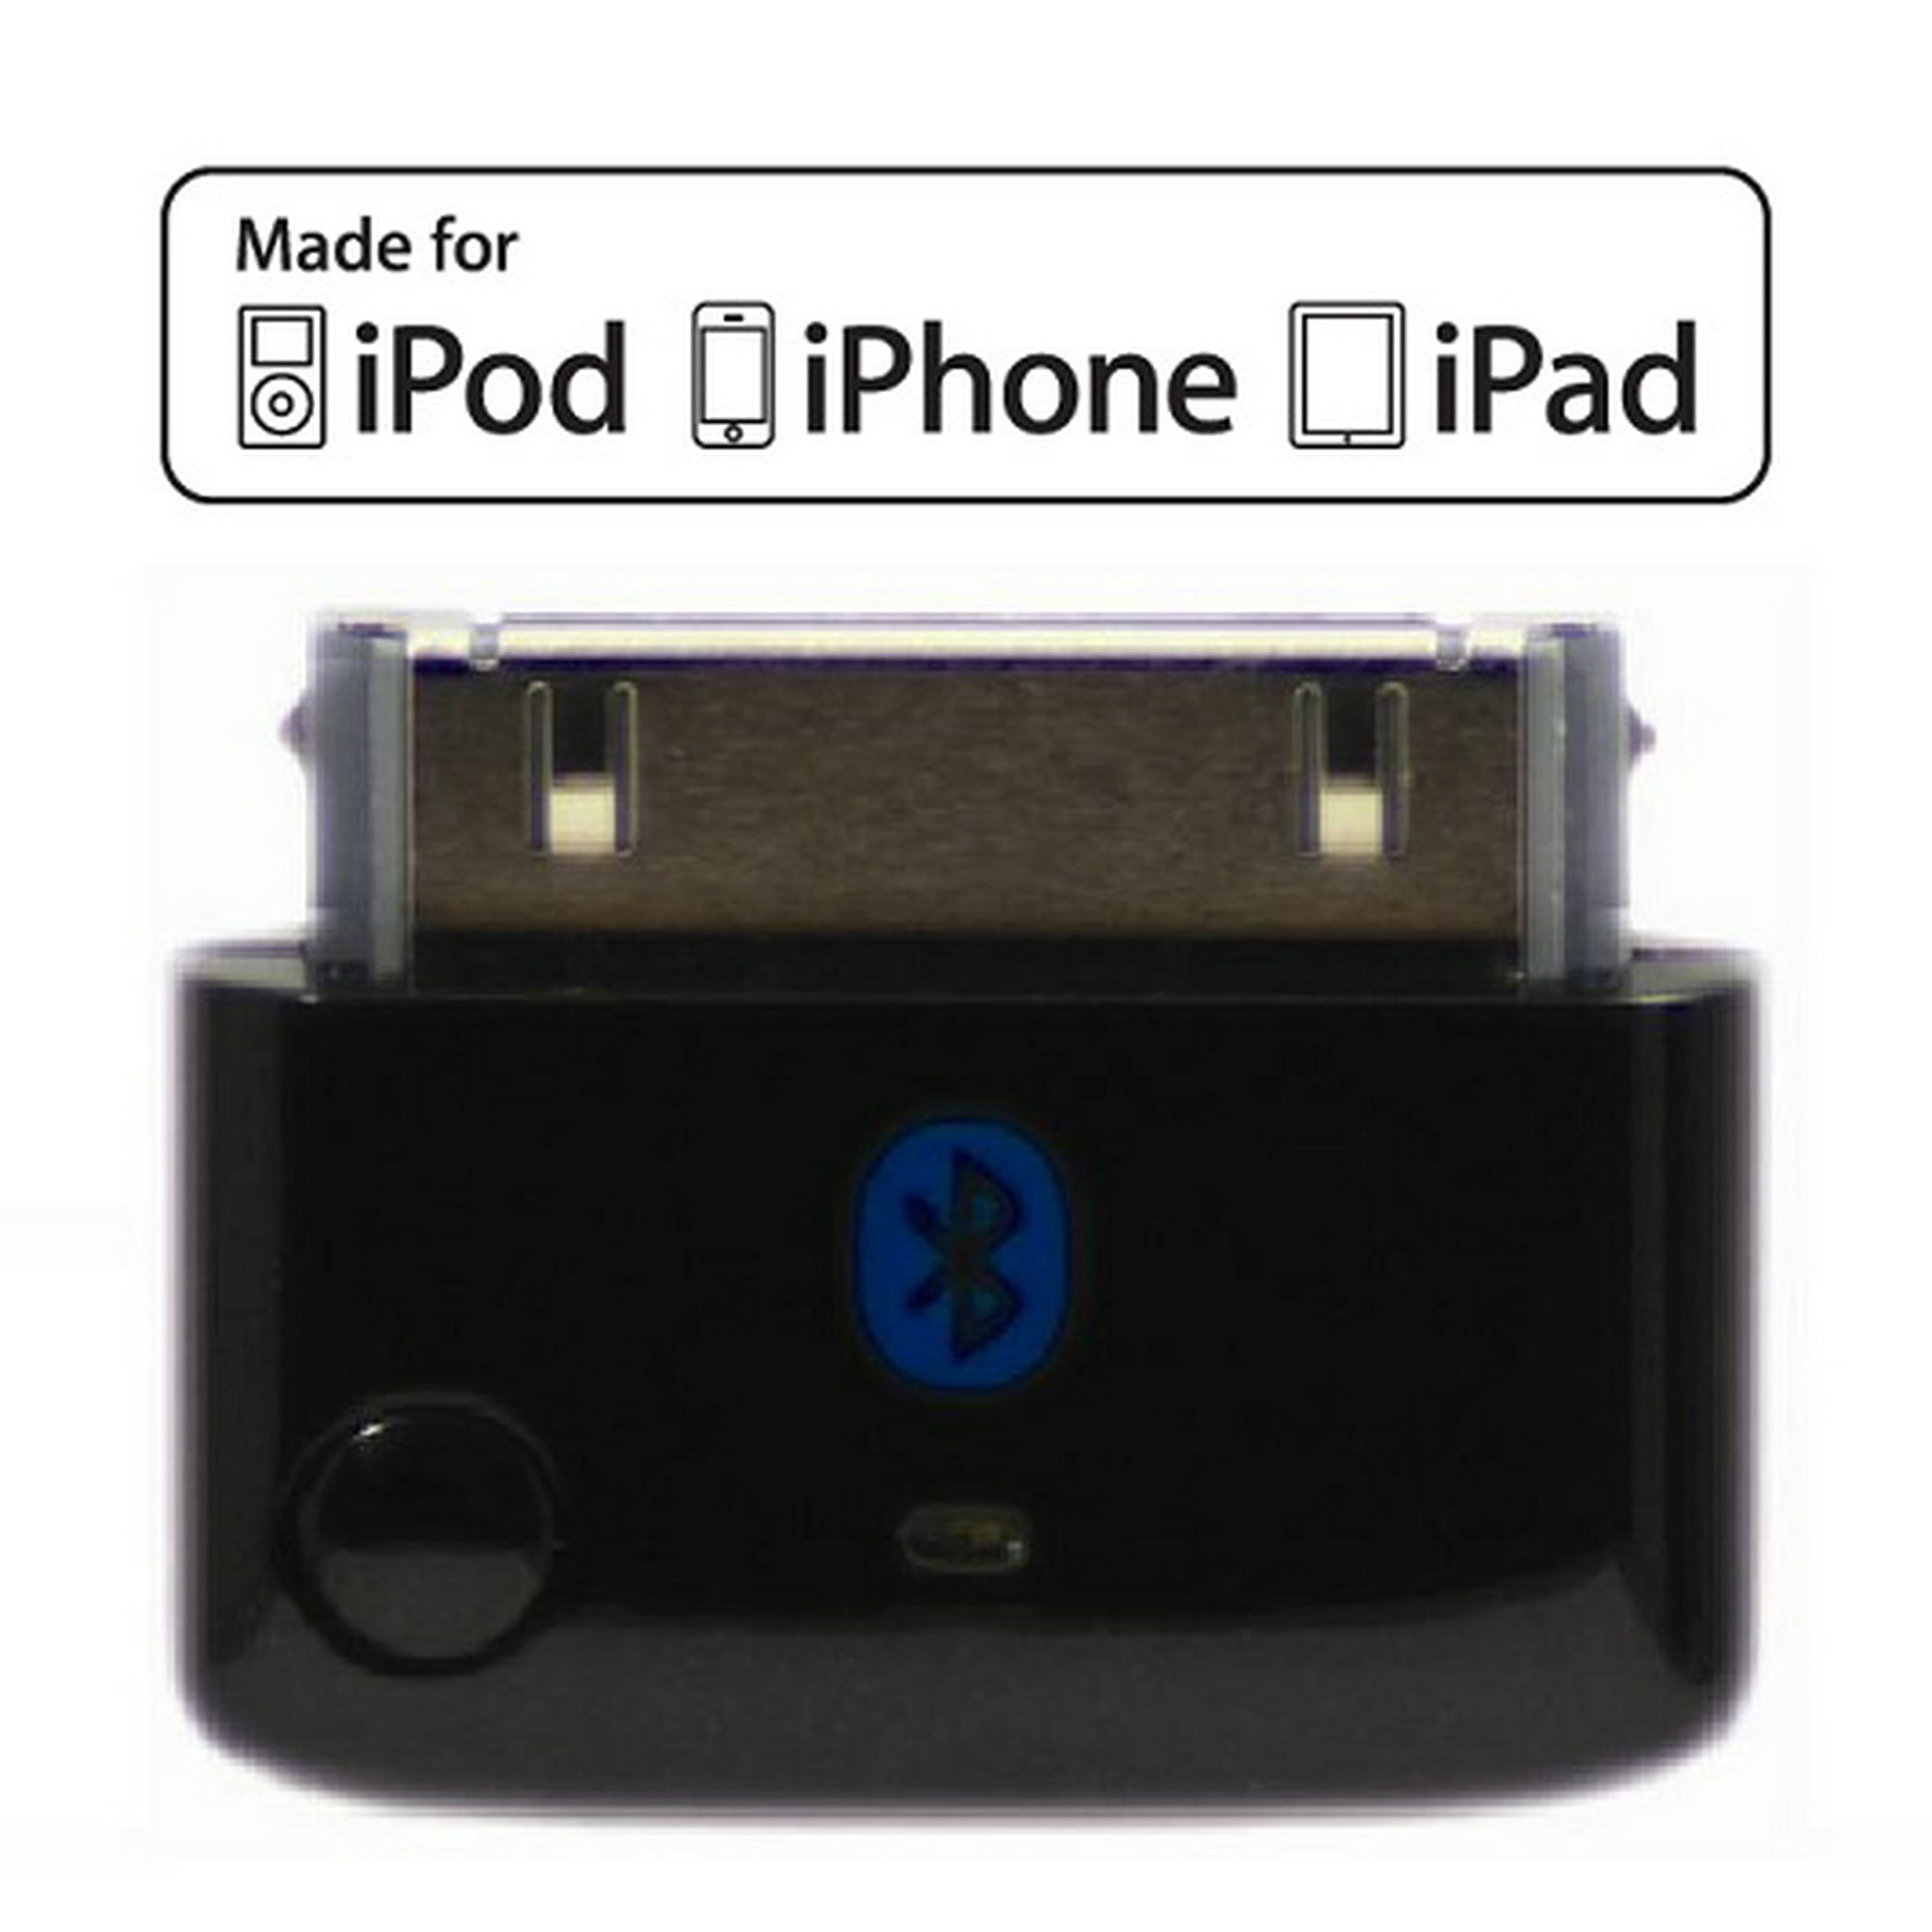 Verbieden Maxim Extreem belangrijk KOKKIA i10 (Black) : Apple MFi Certified Bluetooth Splitter Transmitter.  Compatible to Apple iPod,iPhone,iPad with 30-pin connector. Compatible  streaming to 2 Sets Apple AirPods. | Walmart Canada